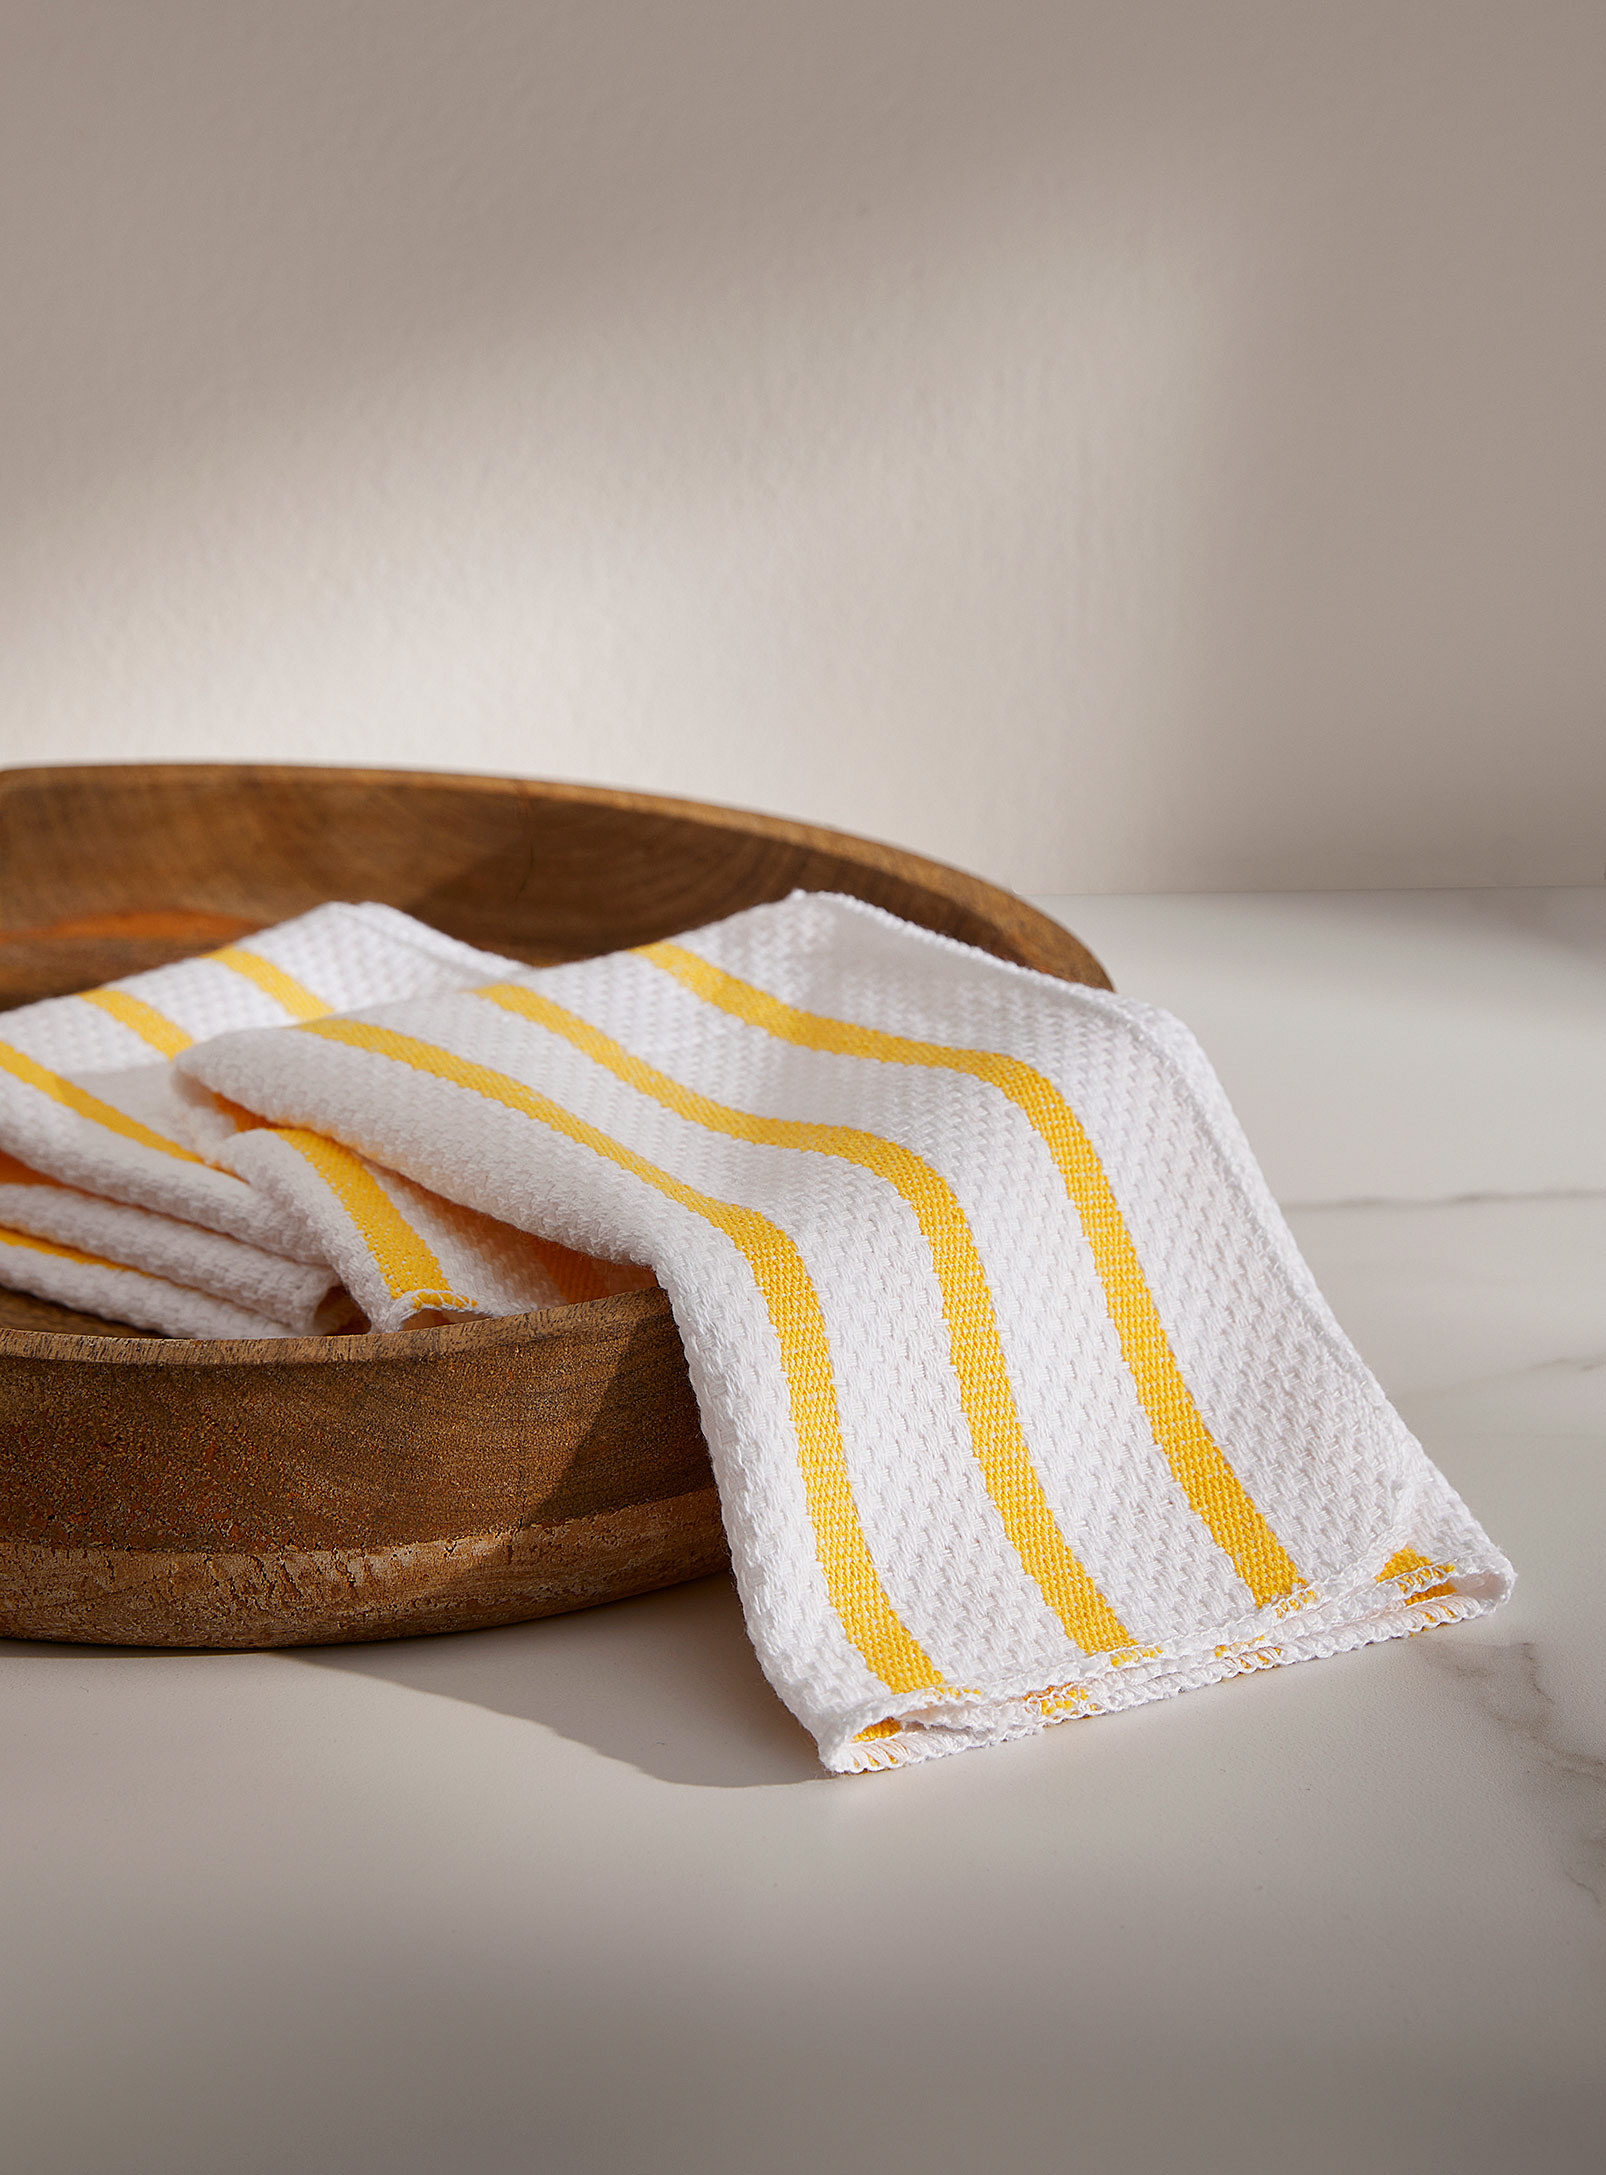 Danica Umbrella Stripes Dishcloths Set Of 2 In Patterned Yellow